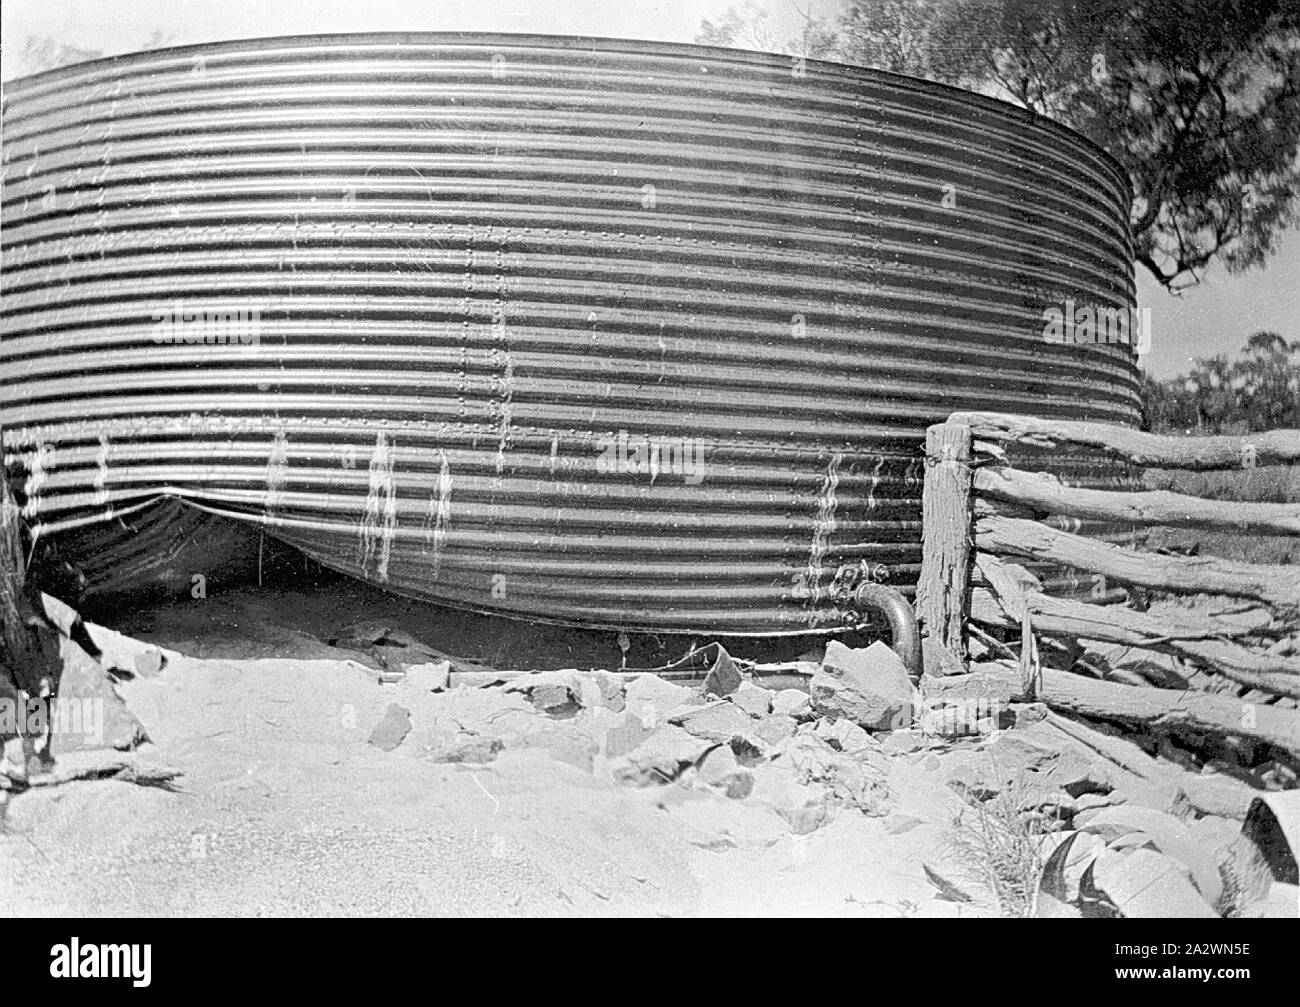 Negative - Flood Damage to a Water Tank on 'Portland Downs' Station, Isisford District, Queensland, circa 1915, Flood damage to a large water tank on 'Portland Downs' station Stock Photo